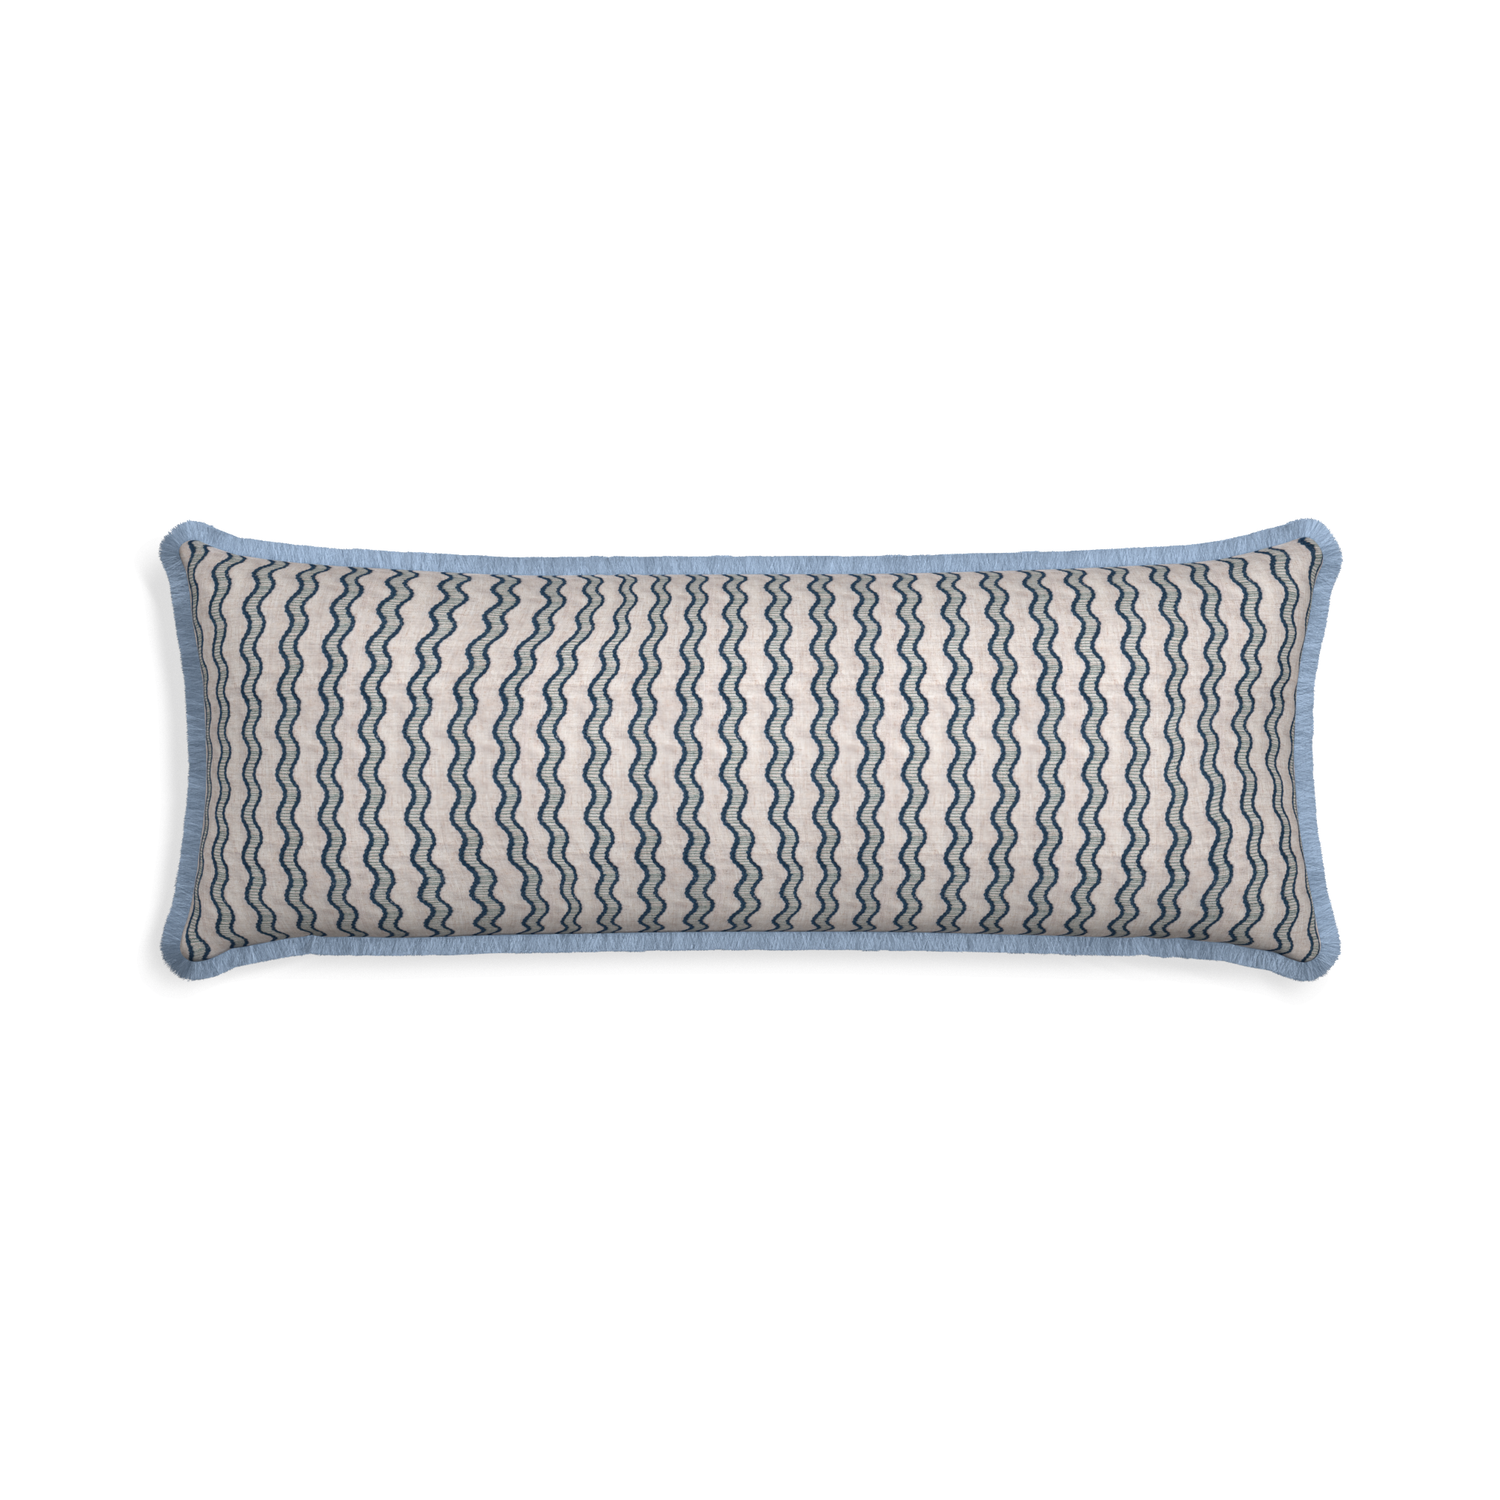 Xl-lumbar beatrice custom embroidered wavepillow with sky fringe on white background